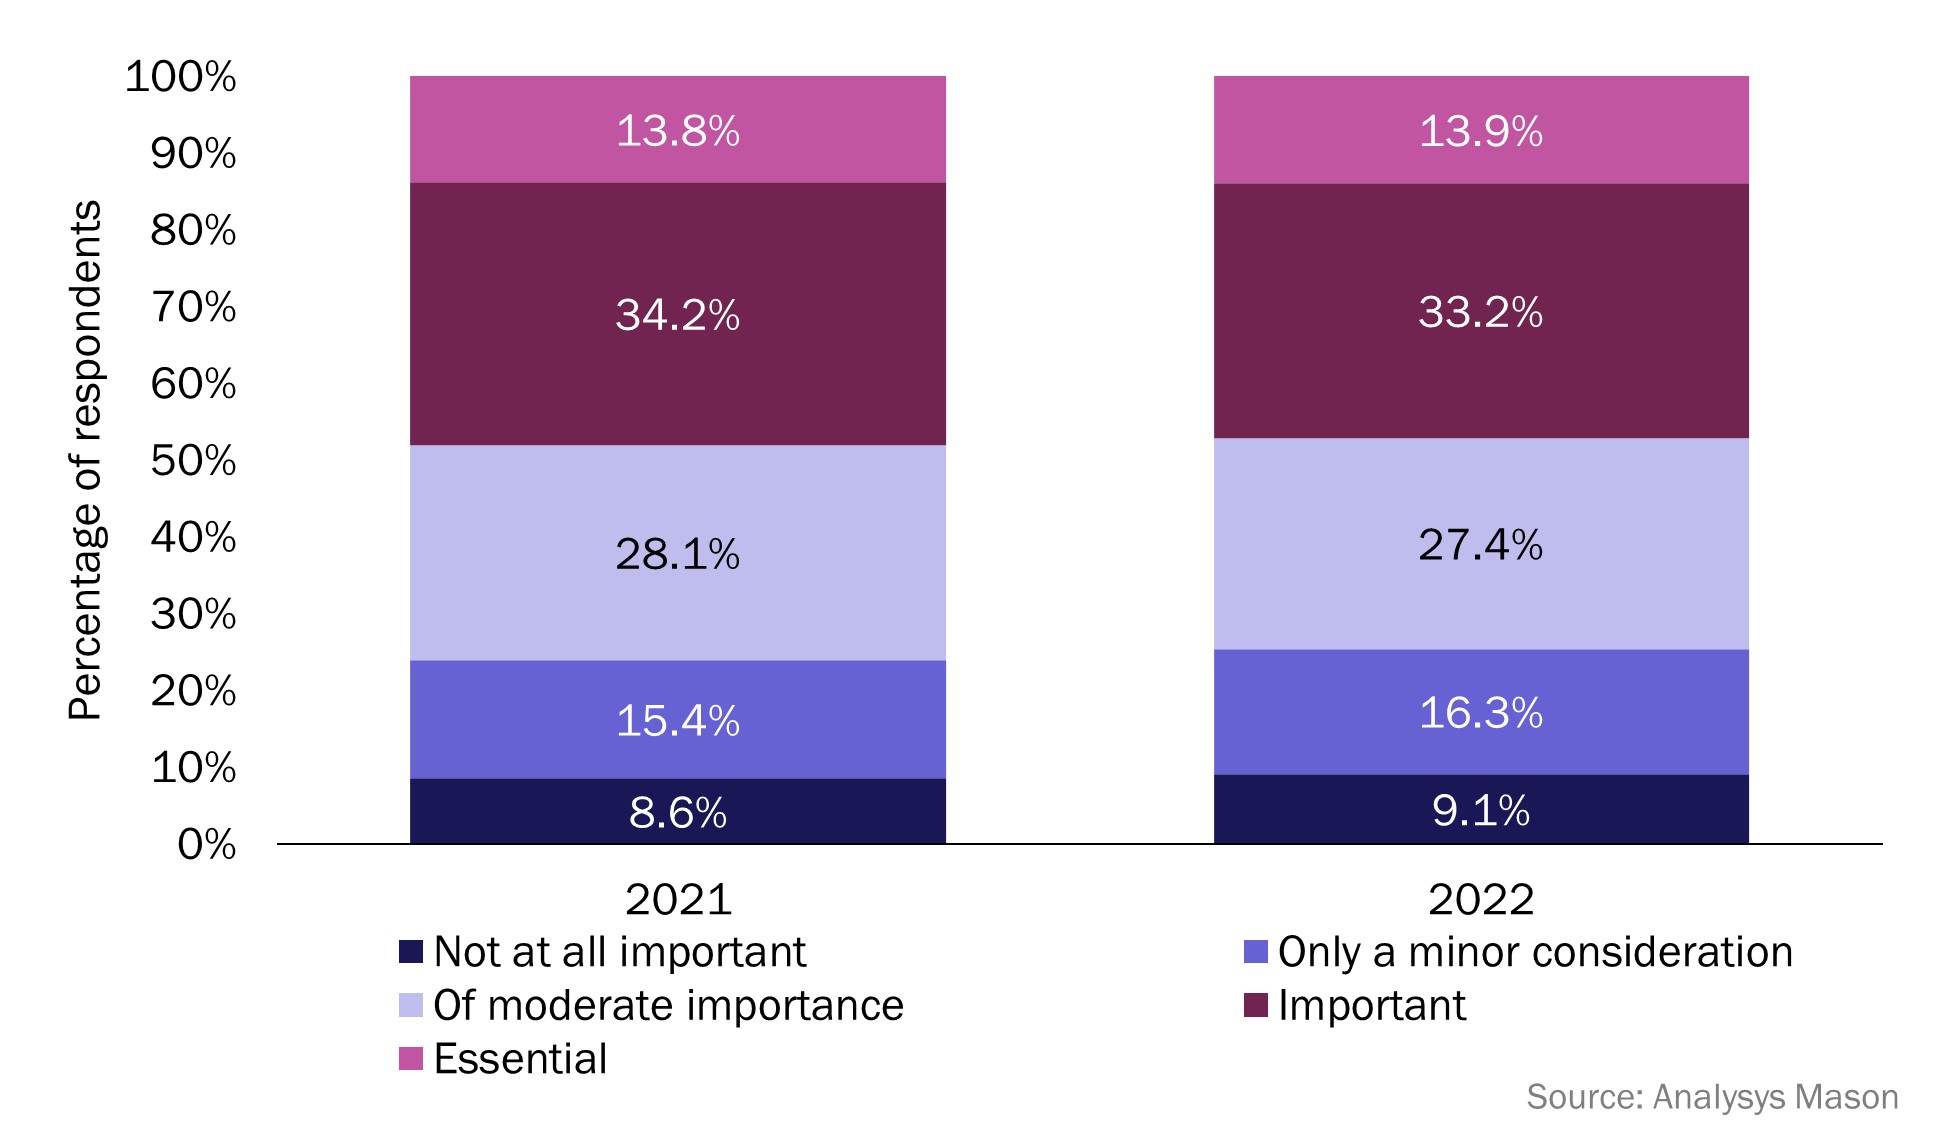 Figure 1: The importance of green credentials to consumers, worldwide, 2021–2022